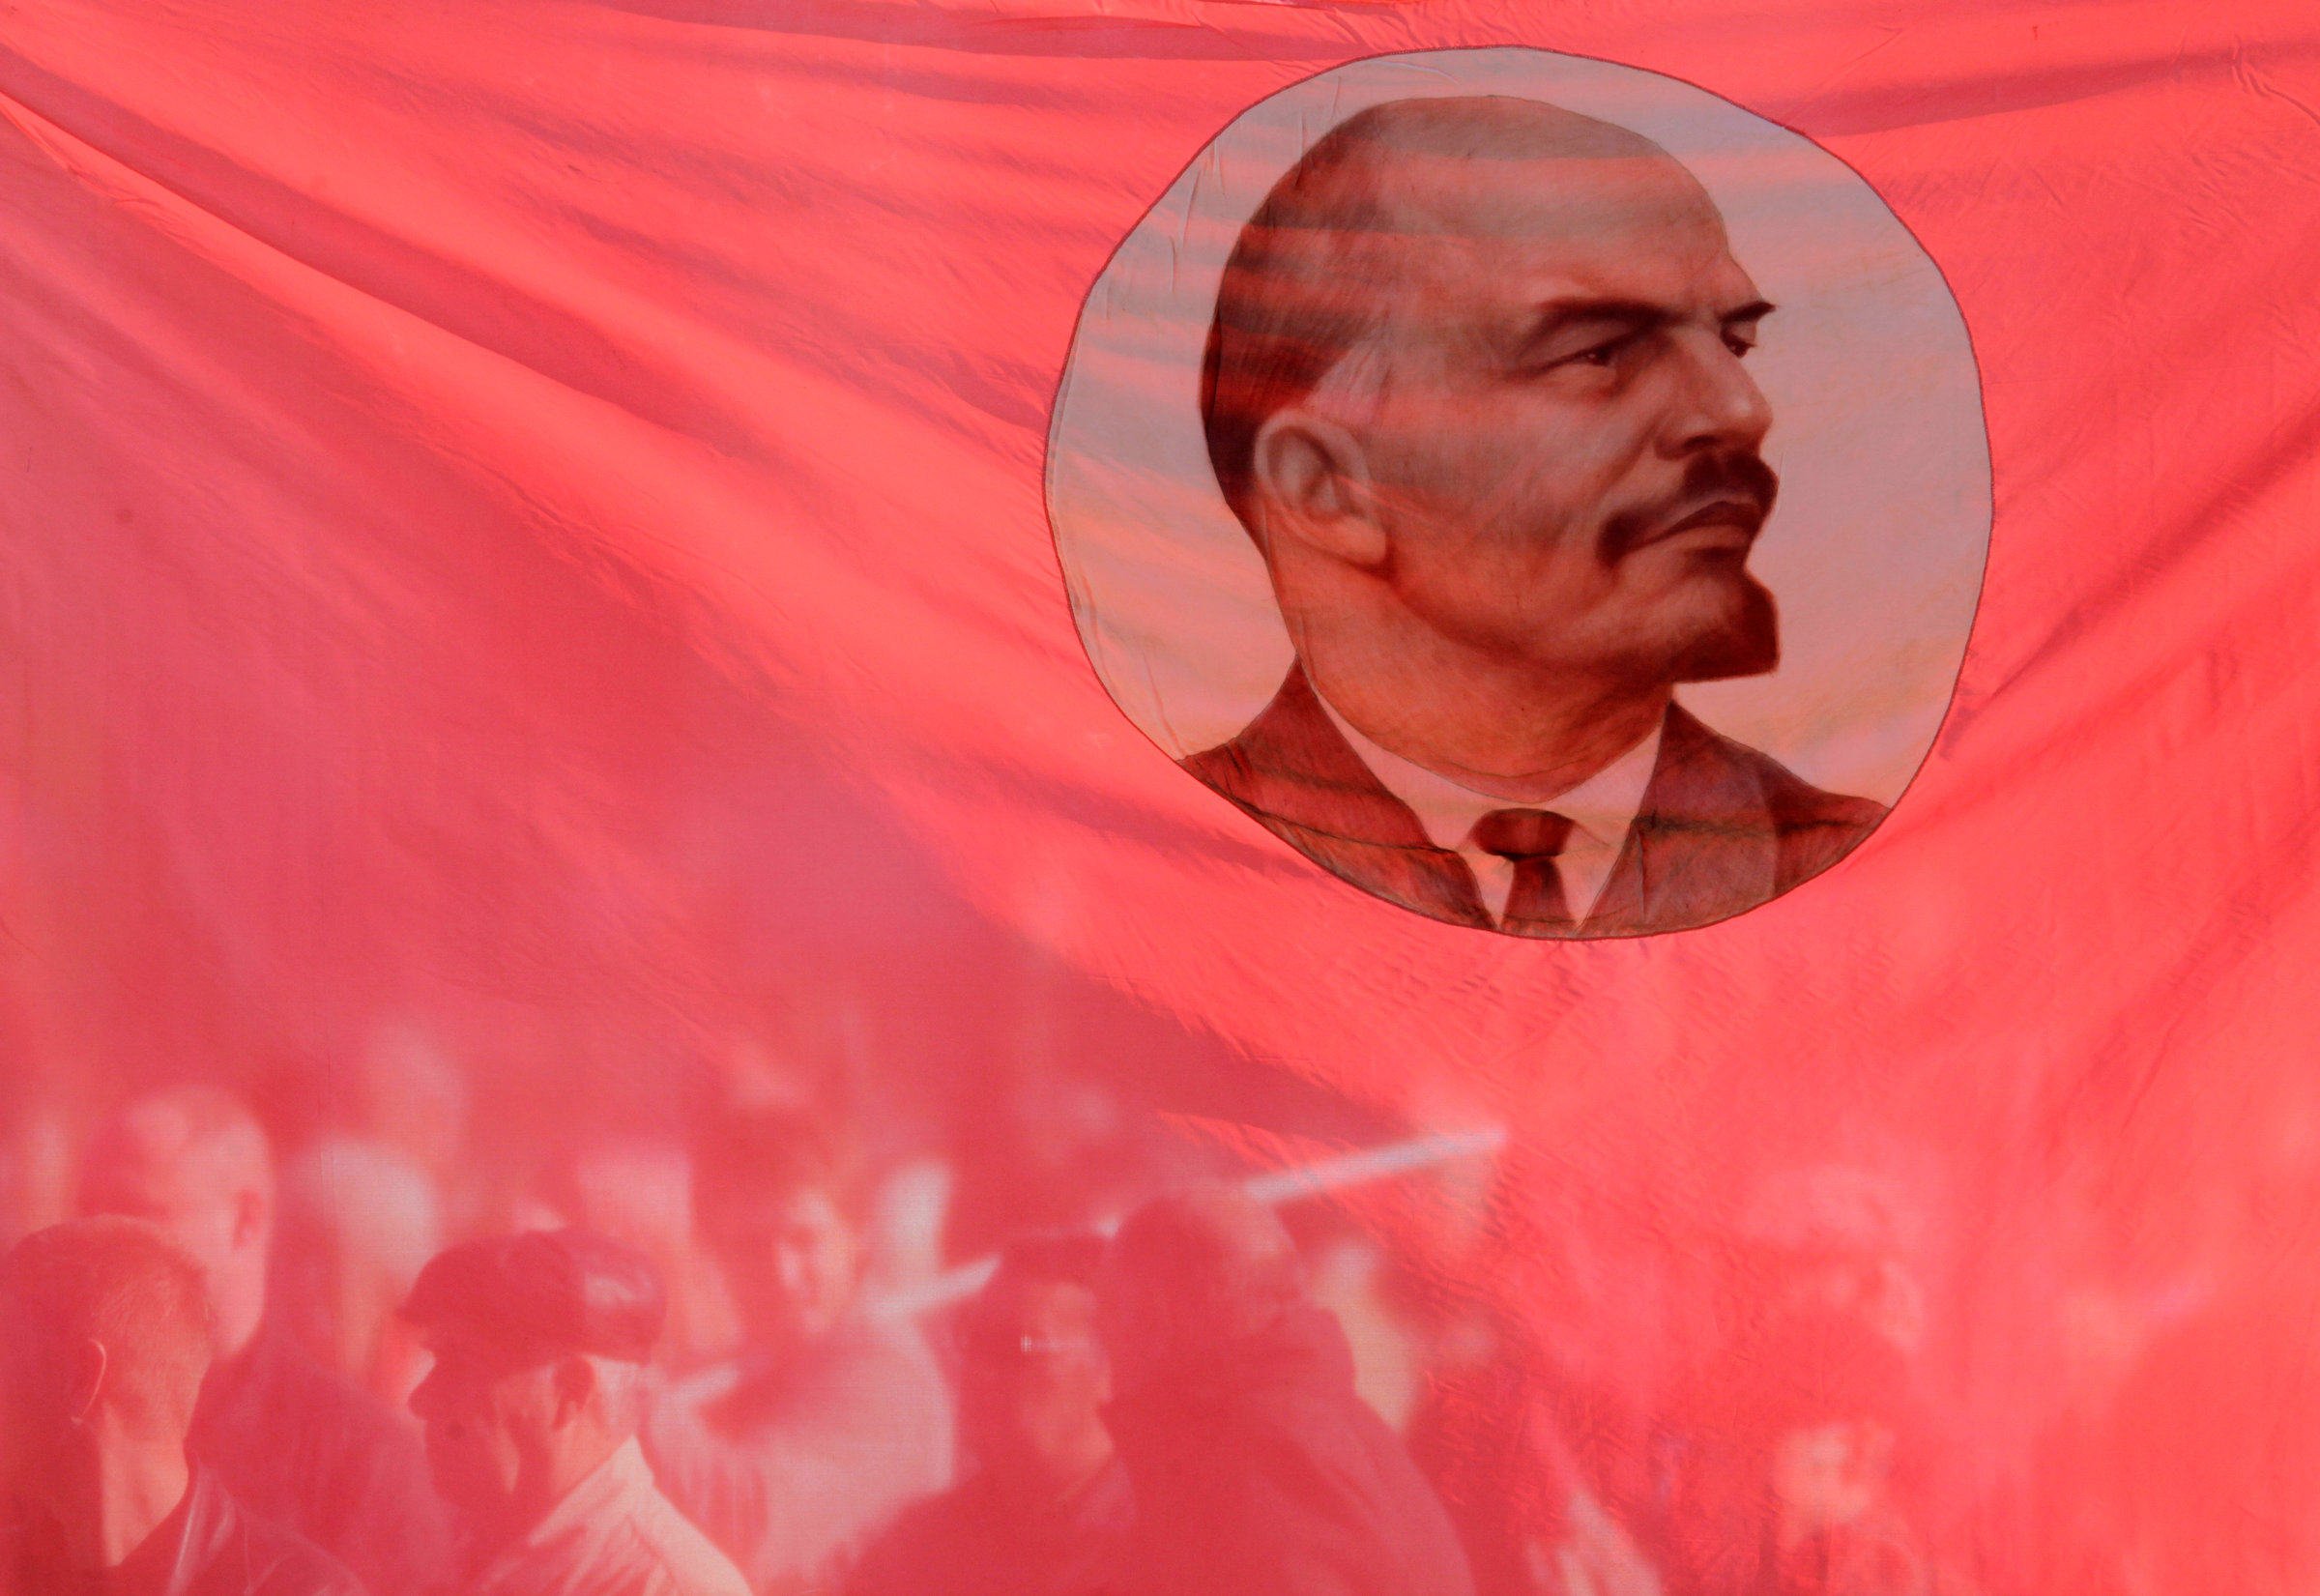 Commemorations of Vladimir Lenin appear to have fallen off the agenda for the Chinese Communist Party, unlike during the times of Mao Zedong. Photo: Reuters